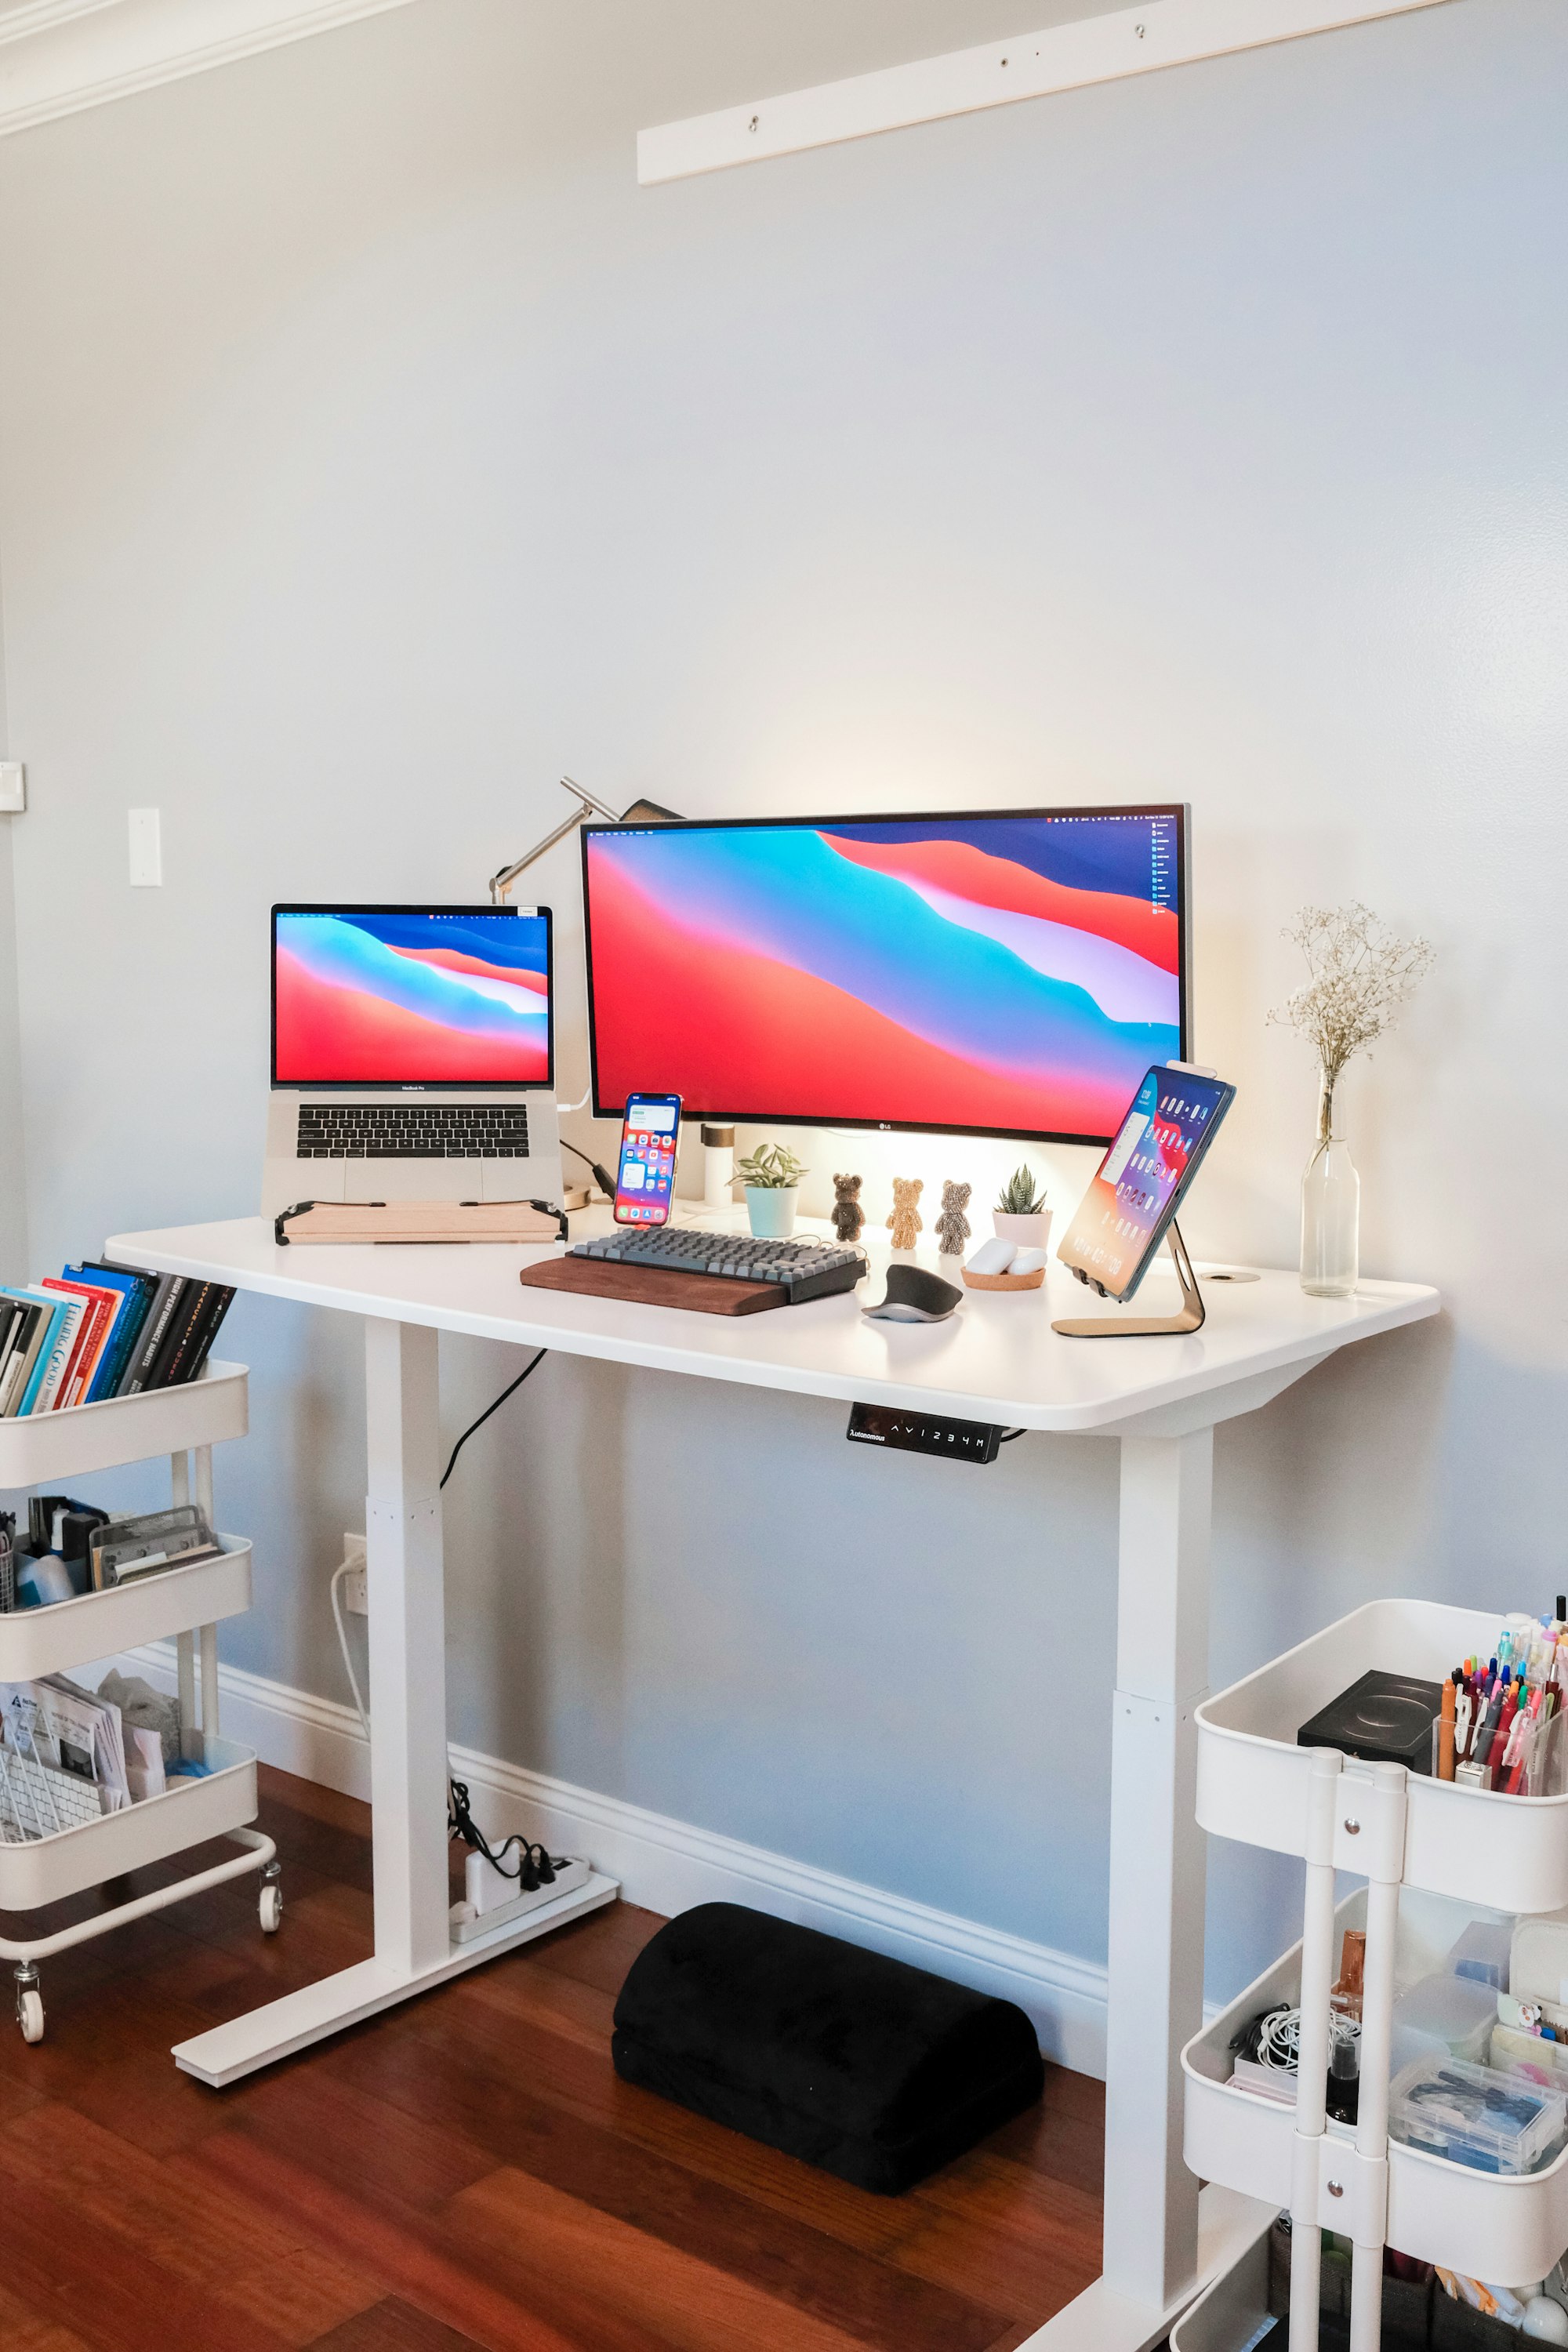 6 Standing Desks Under $600 to Upgrade your Home Office in 2021